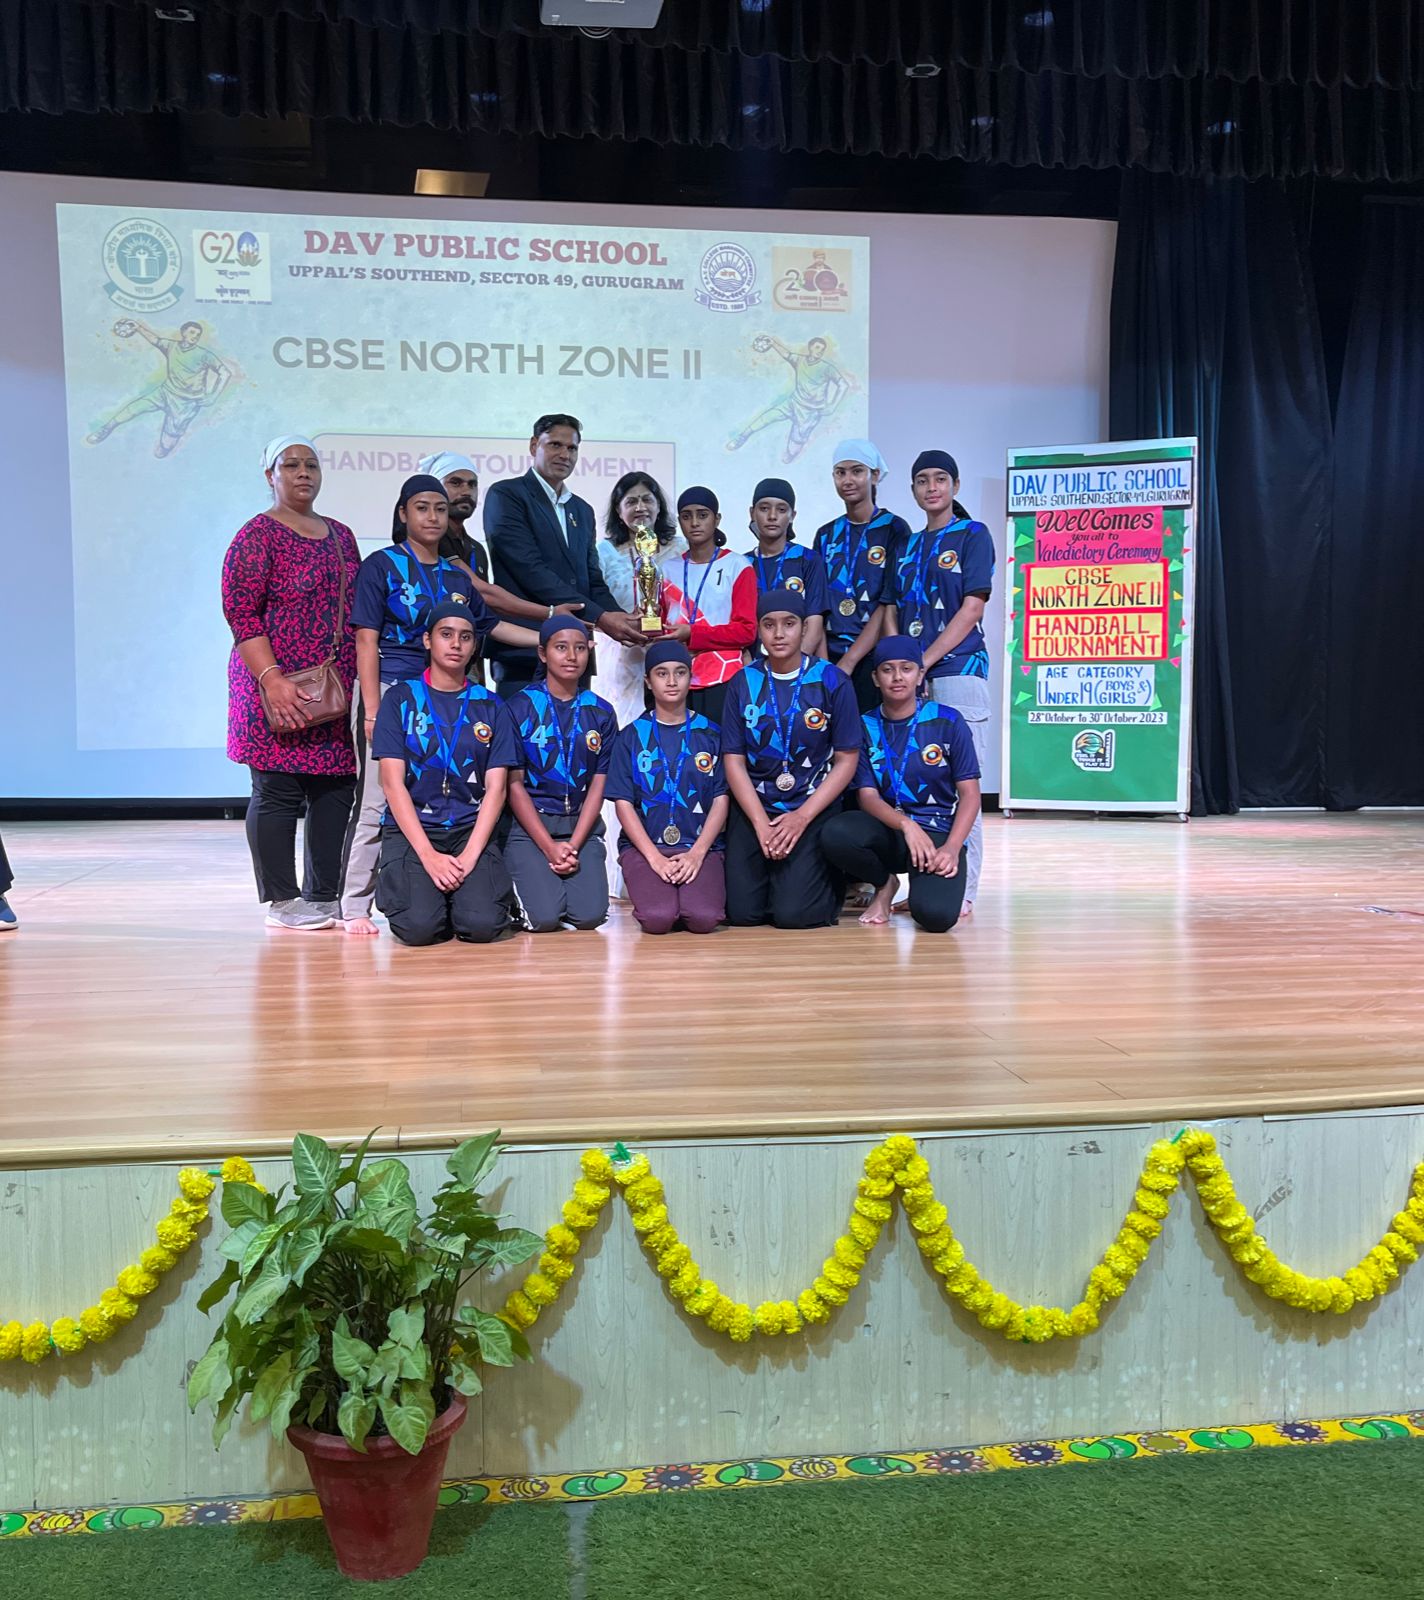 Secured Second position in the CBSE Cluster 18 North Zone by Under 19 girls Handball team